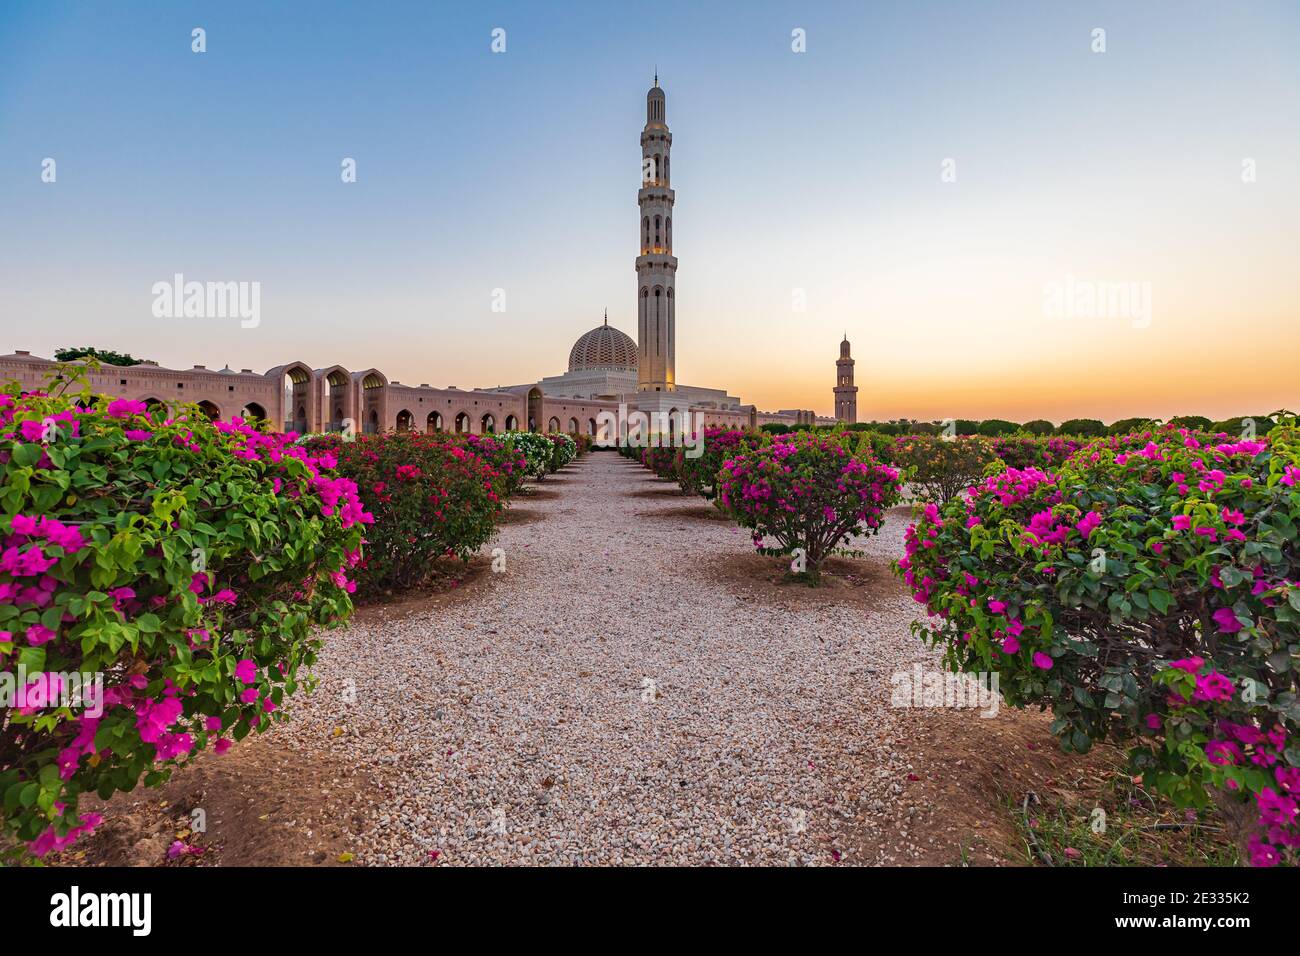 Middle East, Arabian Peninsula, Oman, Muscat. Sunset view of the Sultan Qaboos Grand Mosque in Bawshar,Muscat. Stock Photo